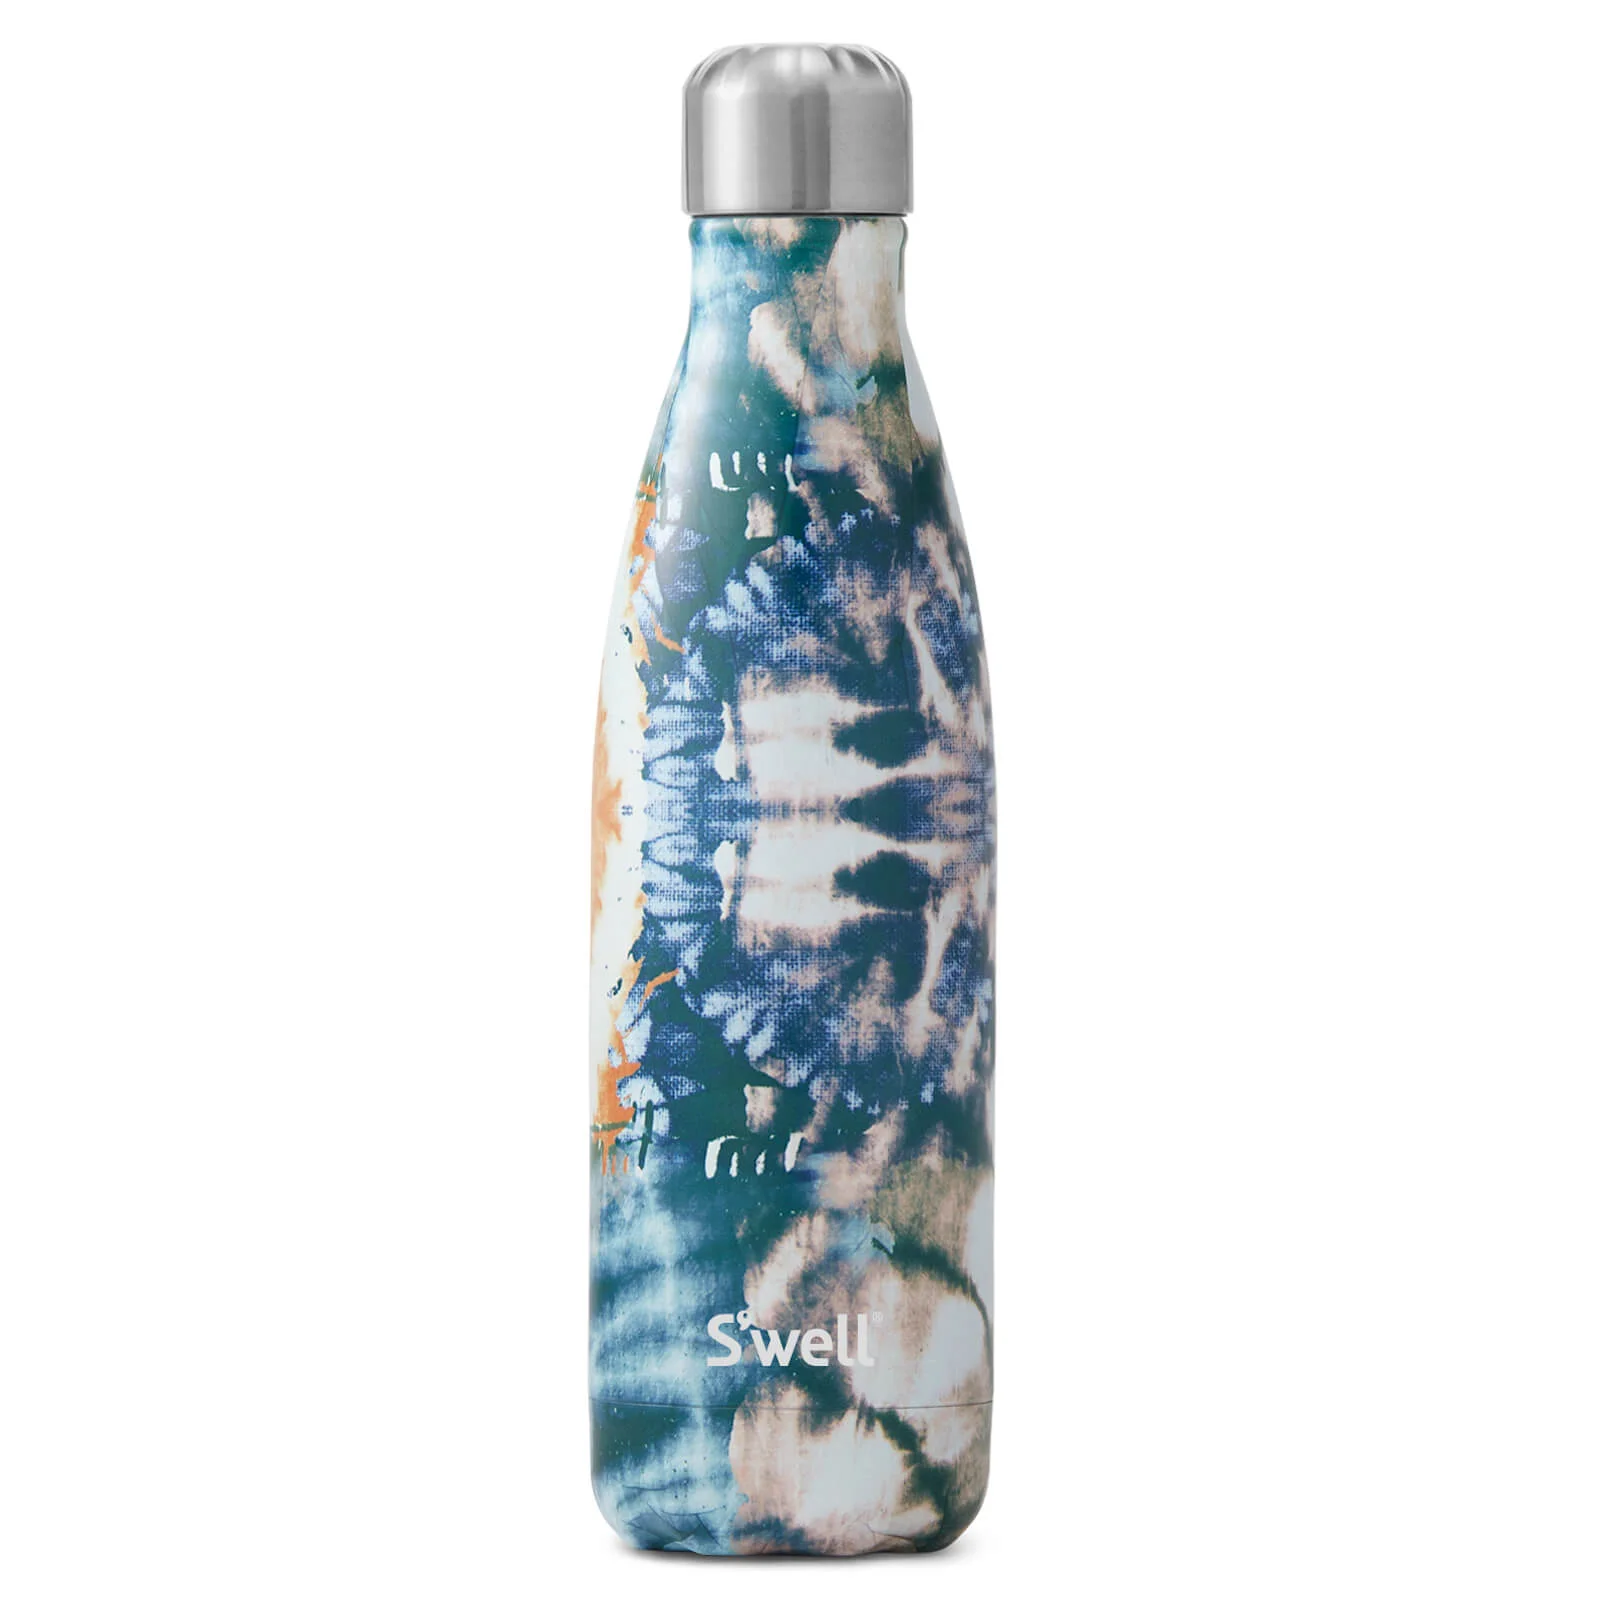 S'well Nomad Water Bottle - 500ml Image 1